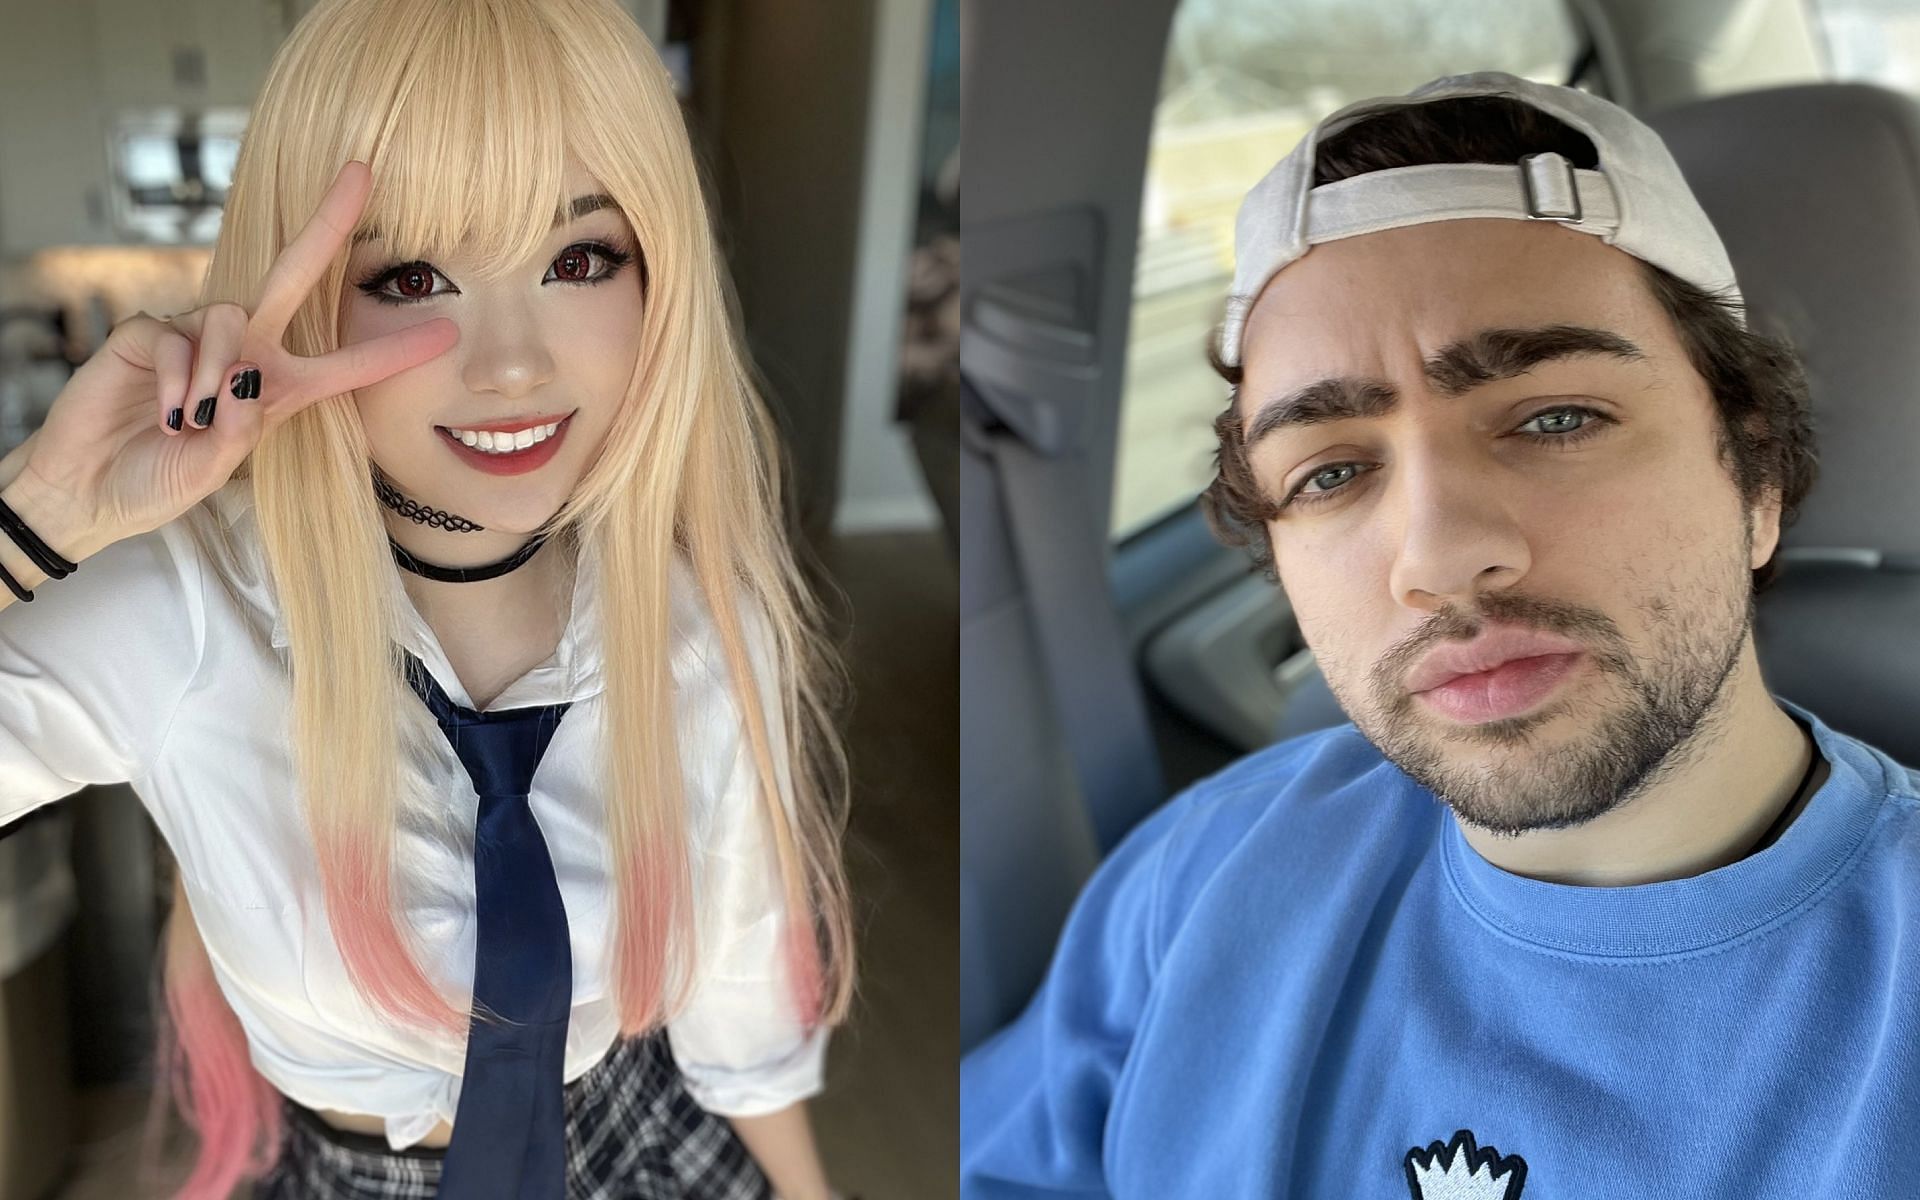 Emiru talks about how she got pulled over by police while hanging out with Mizkif (Images via Emiru and Mizkif/Twitter)